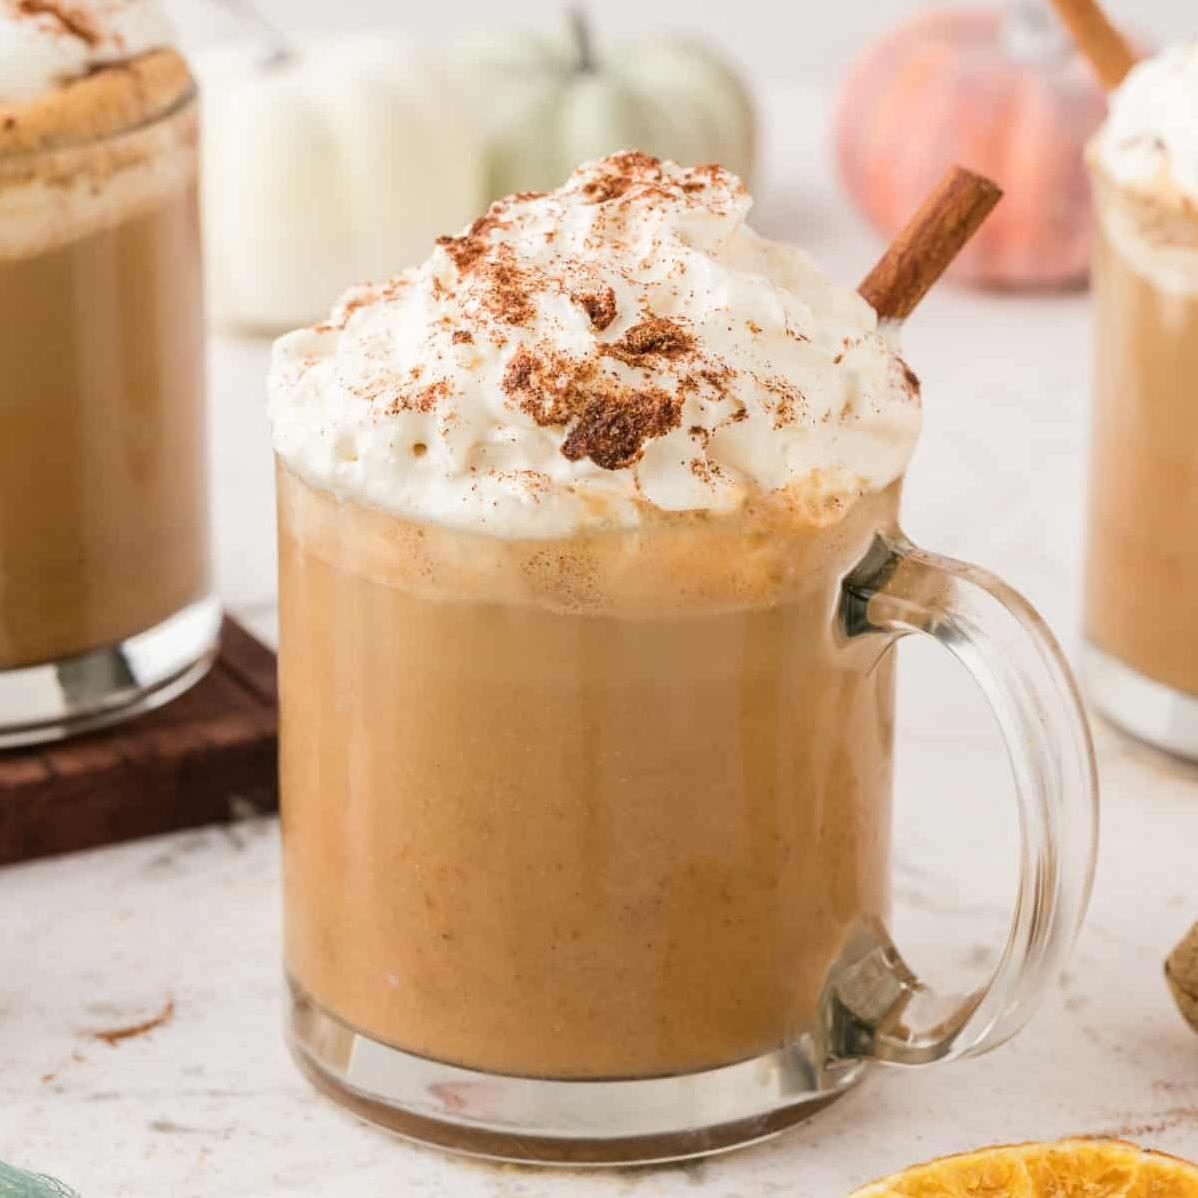  This latte is the perfect way to start any autumn morning.